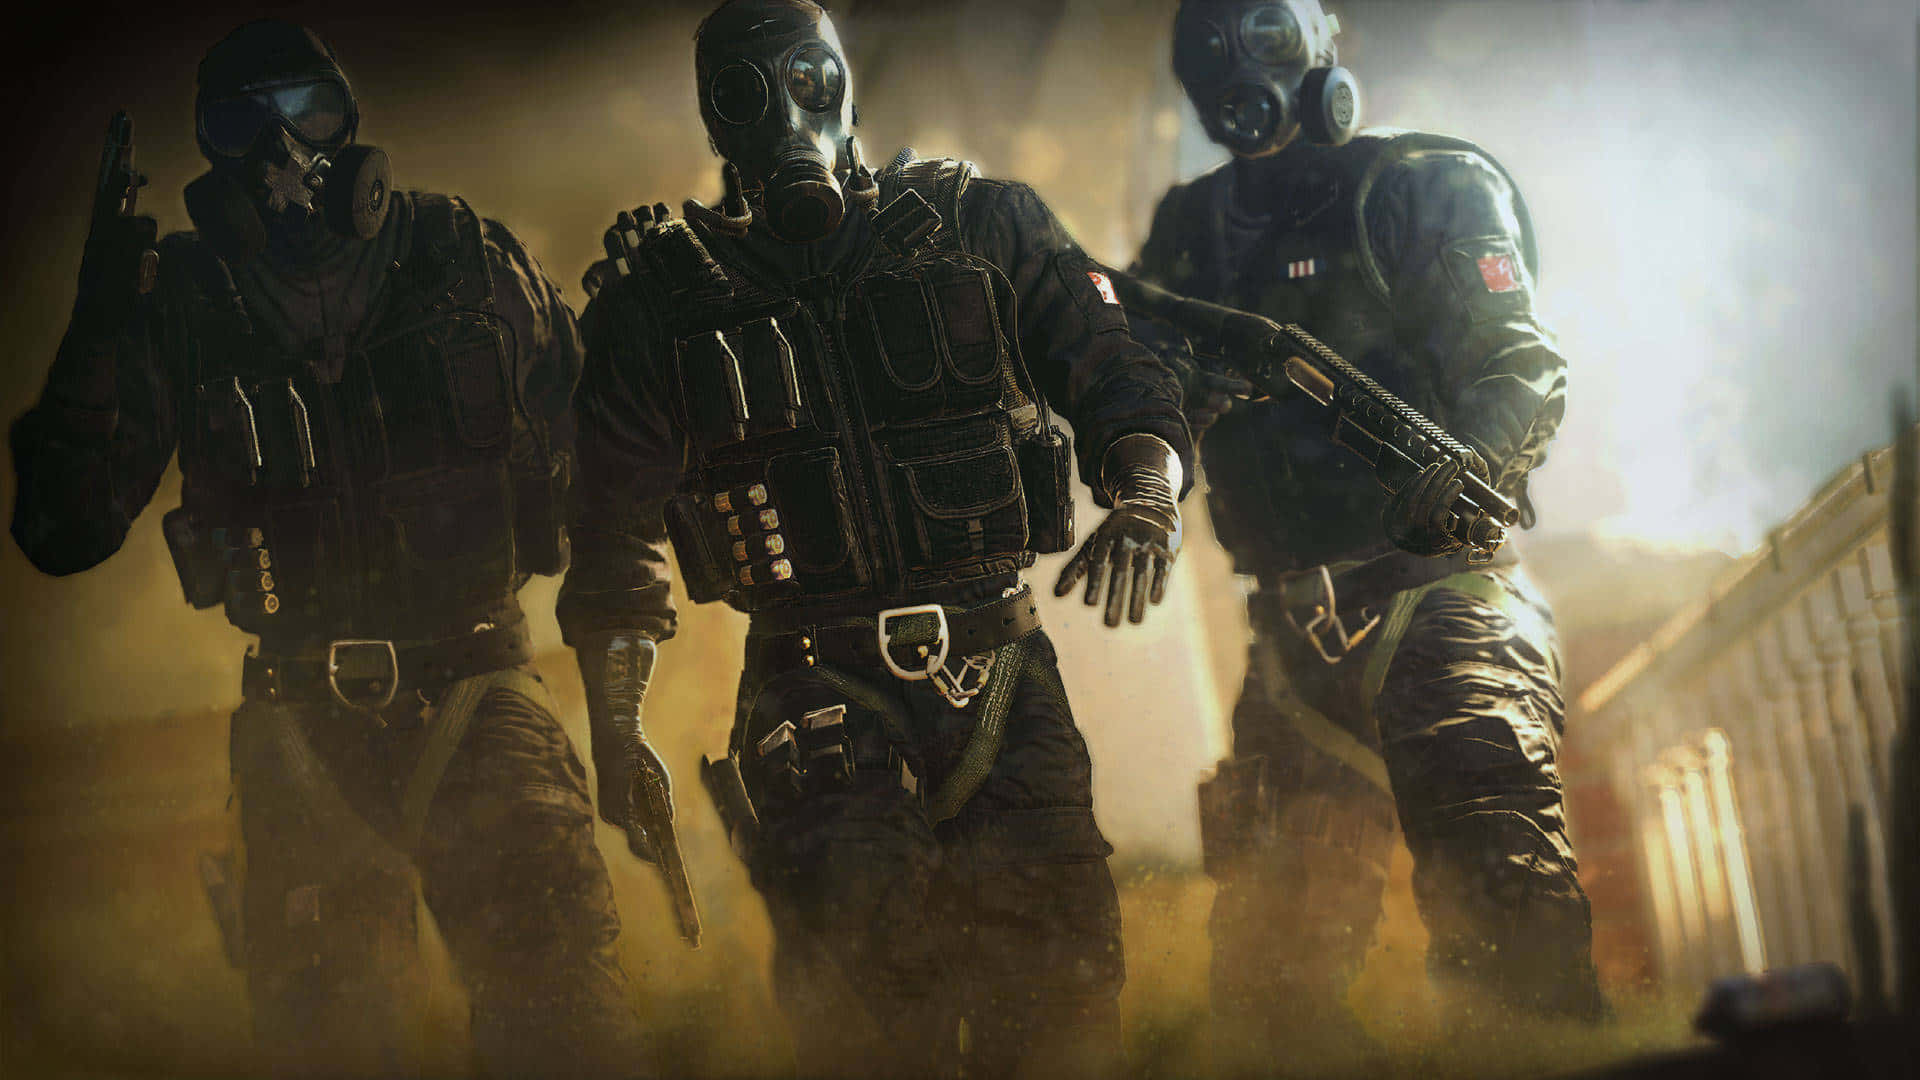 Mute Walking With Others [wallpaper] Wallpaper